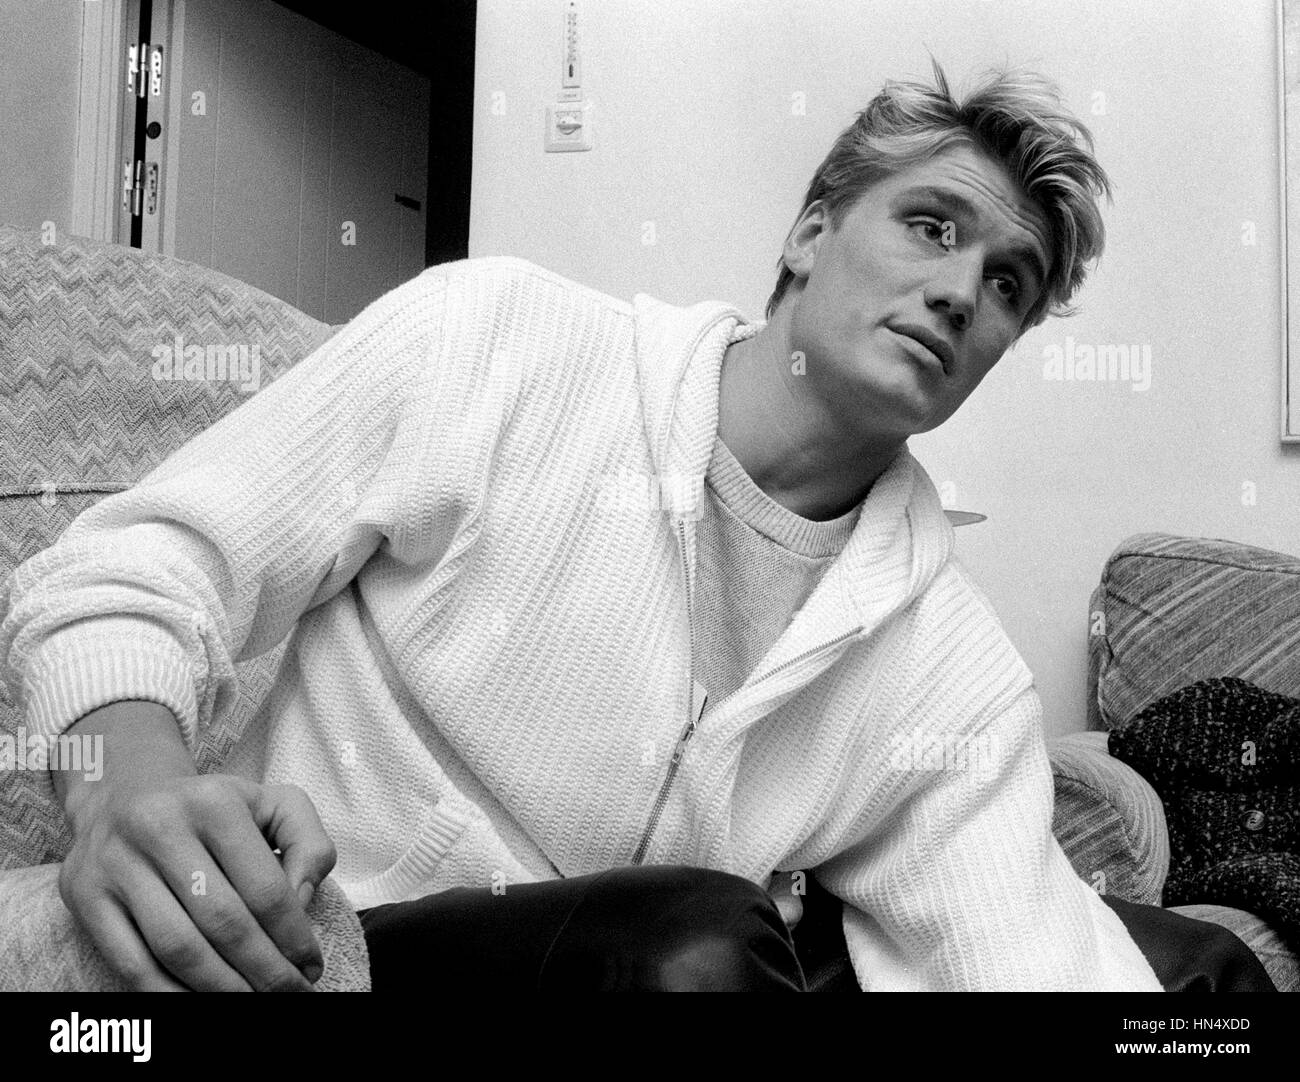 DOLPH LUNDGREN Swedish actor in Film 1986 when he was launched Rocky movies in Stockholm Stock Photo